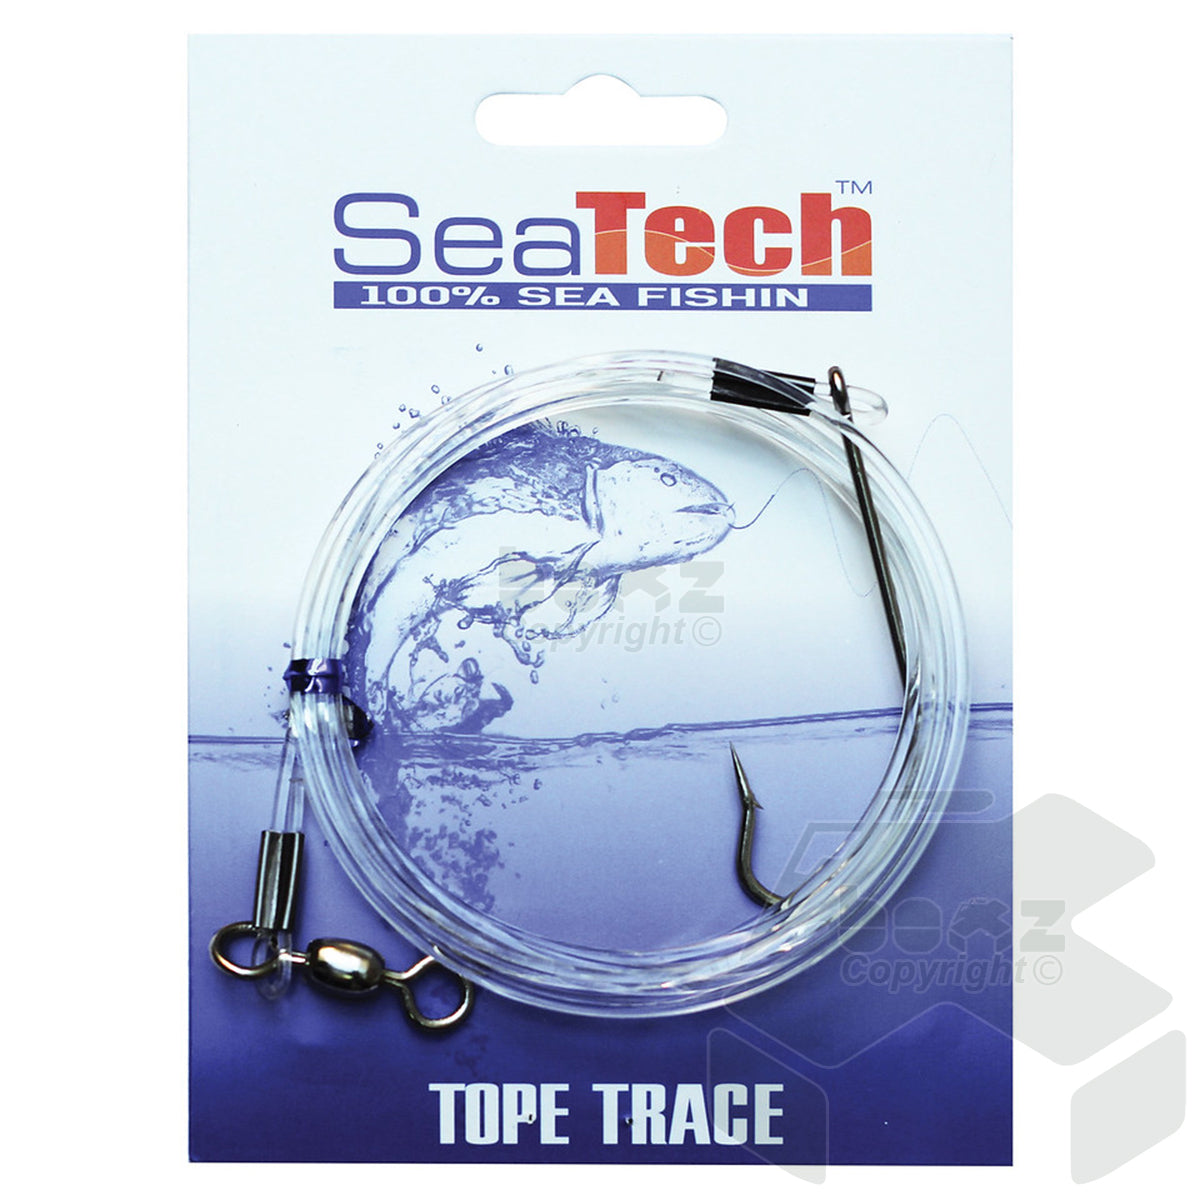 Seatech Tope Trace